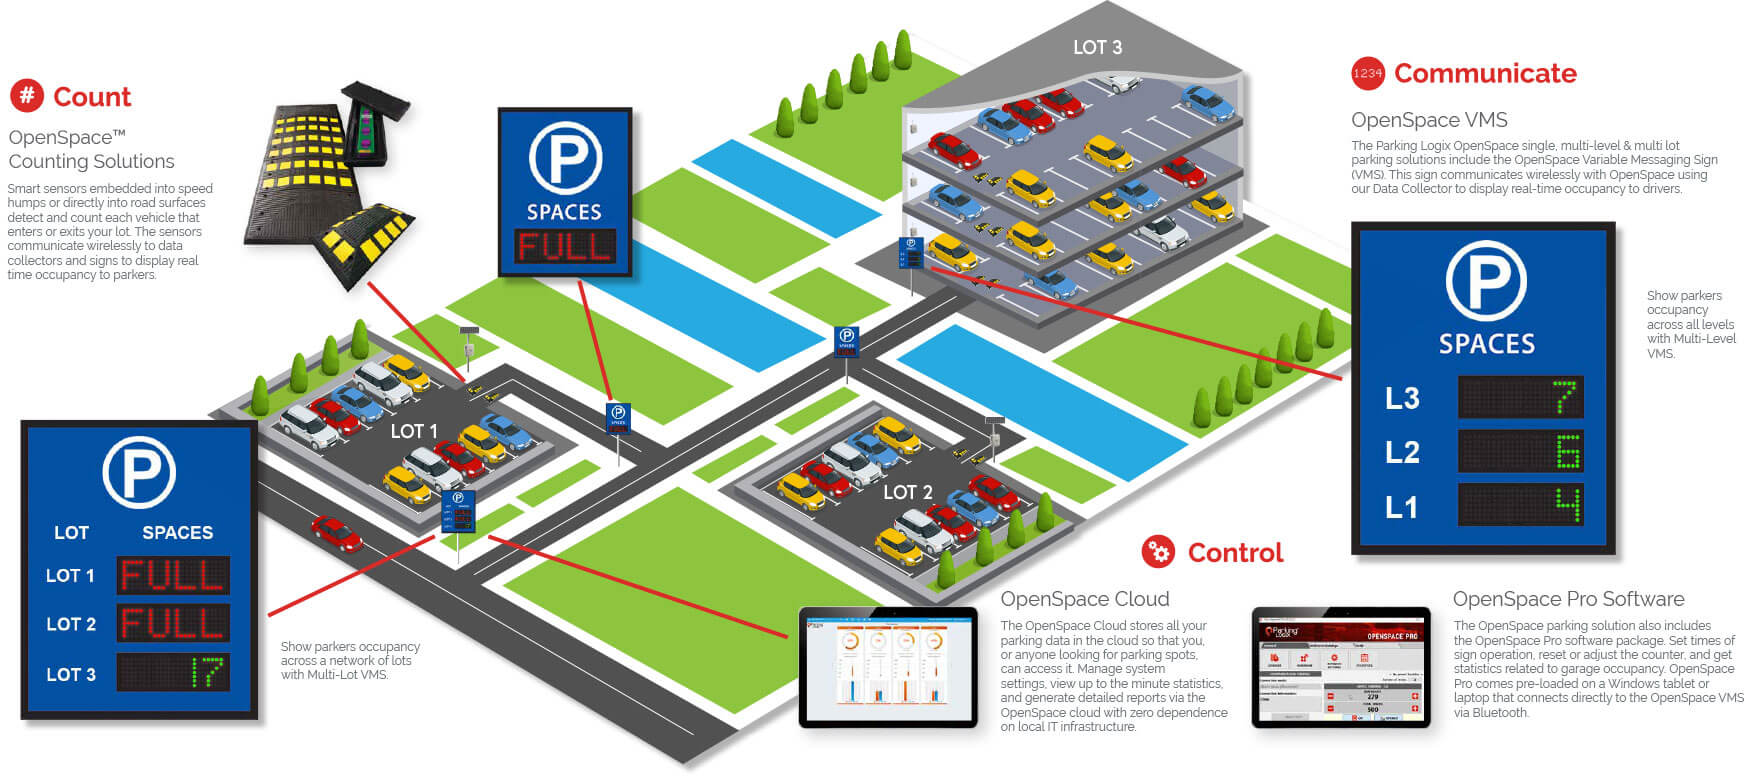 What are the repairs & maintenance costs of parking guidance systems?